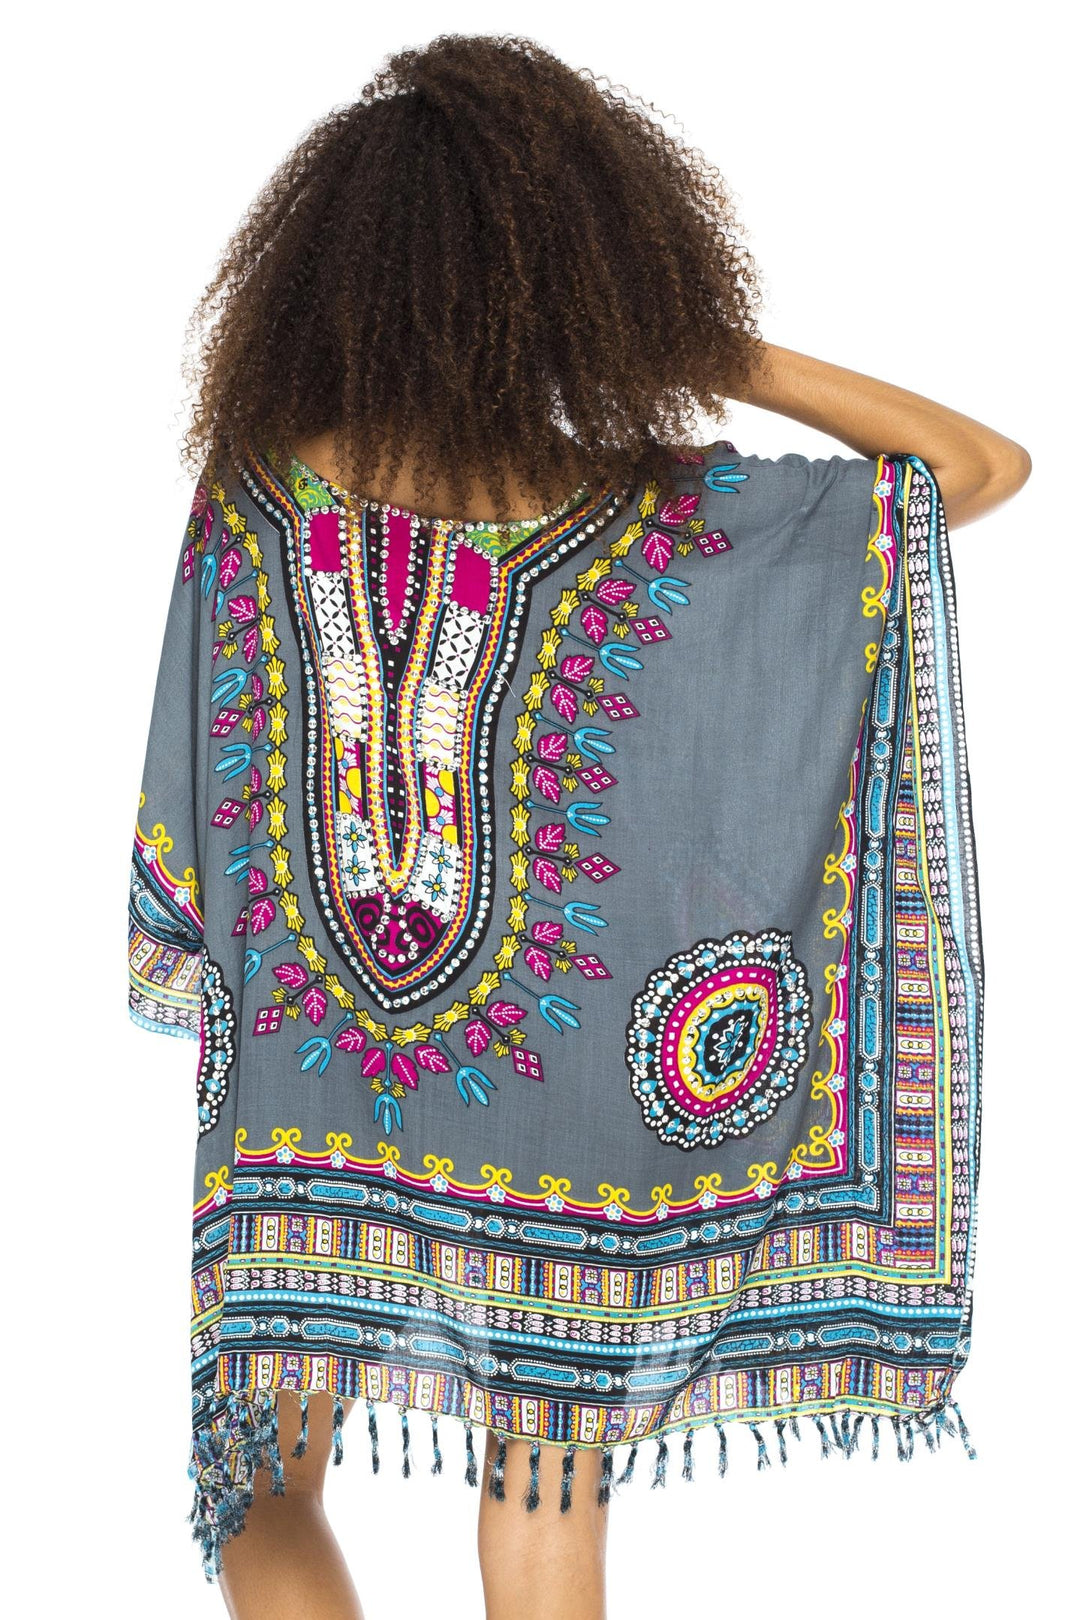 Back From Bali Womens Short Swimsuit Beach Cover Up Sequins African Patterns